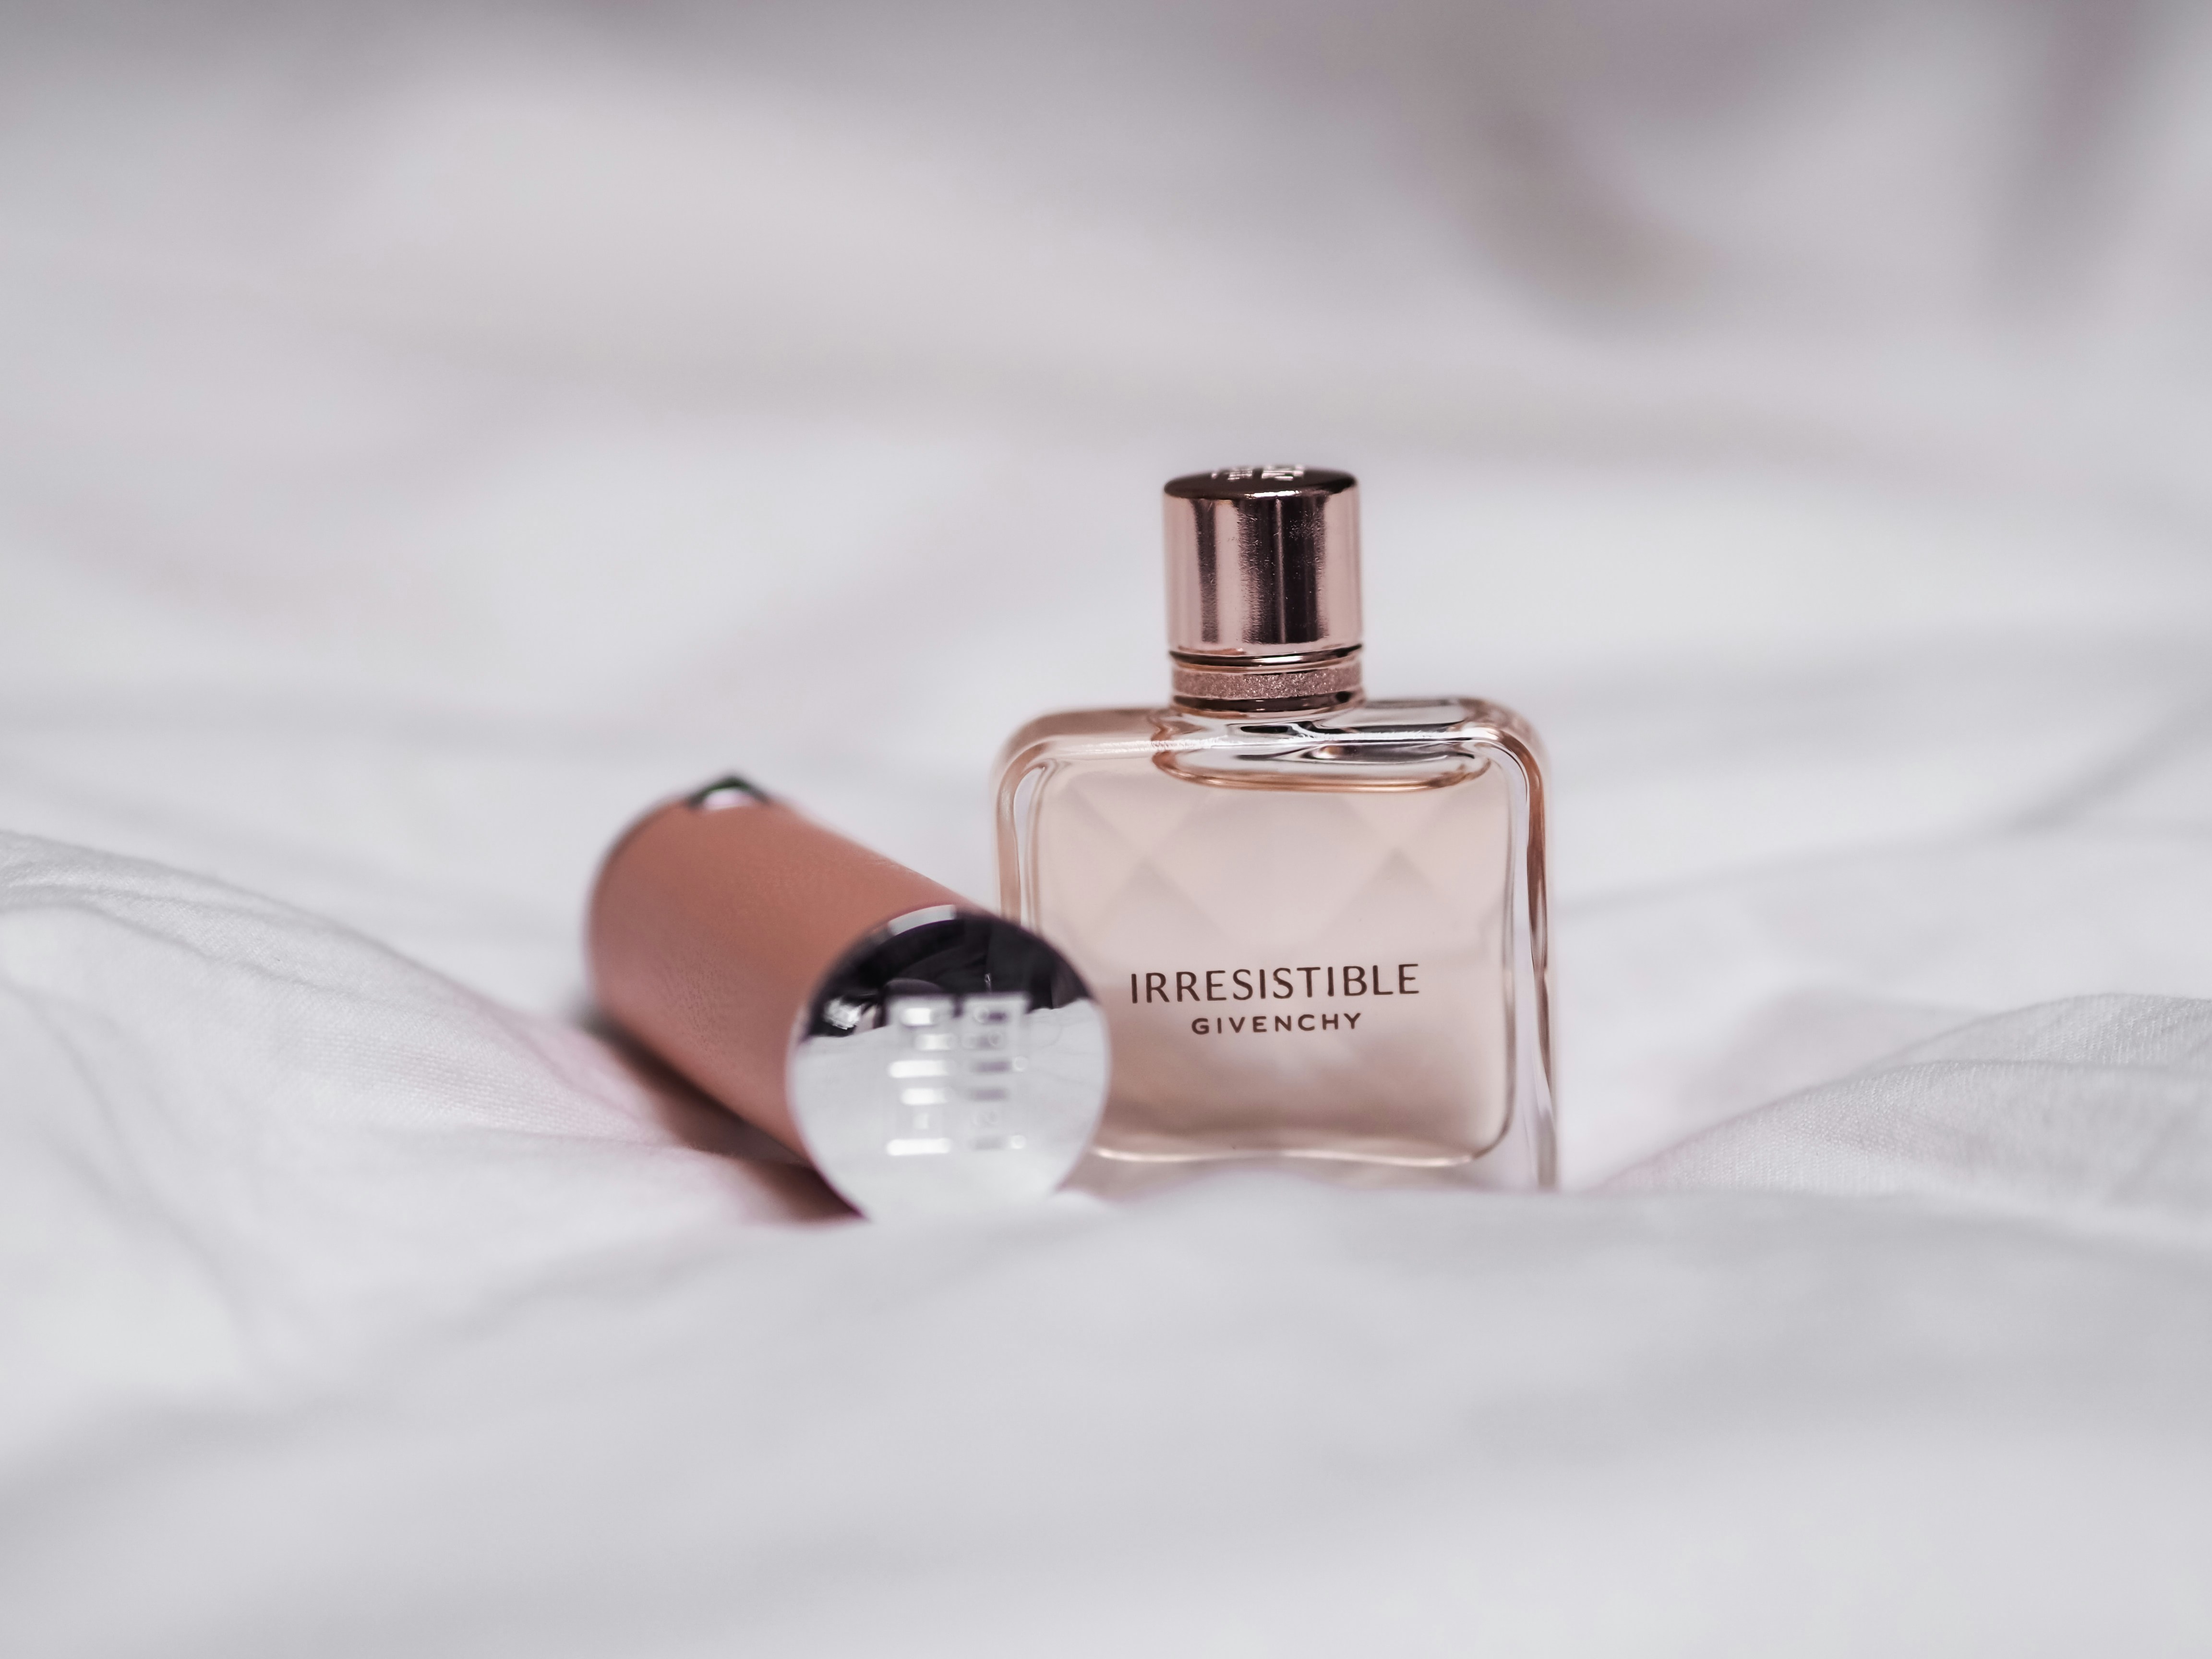 #IrresistibleIsYou by @Givenchy @GivenchyBeauty.   Irresistible Perfume, Lipstick and Pouch with logo. Photo by Laura Chouette ©FreeUse2020 (Thanks to MarionnaudAustria)